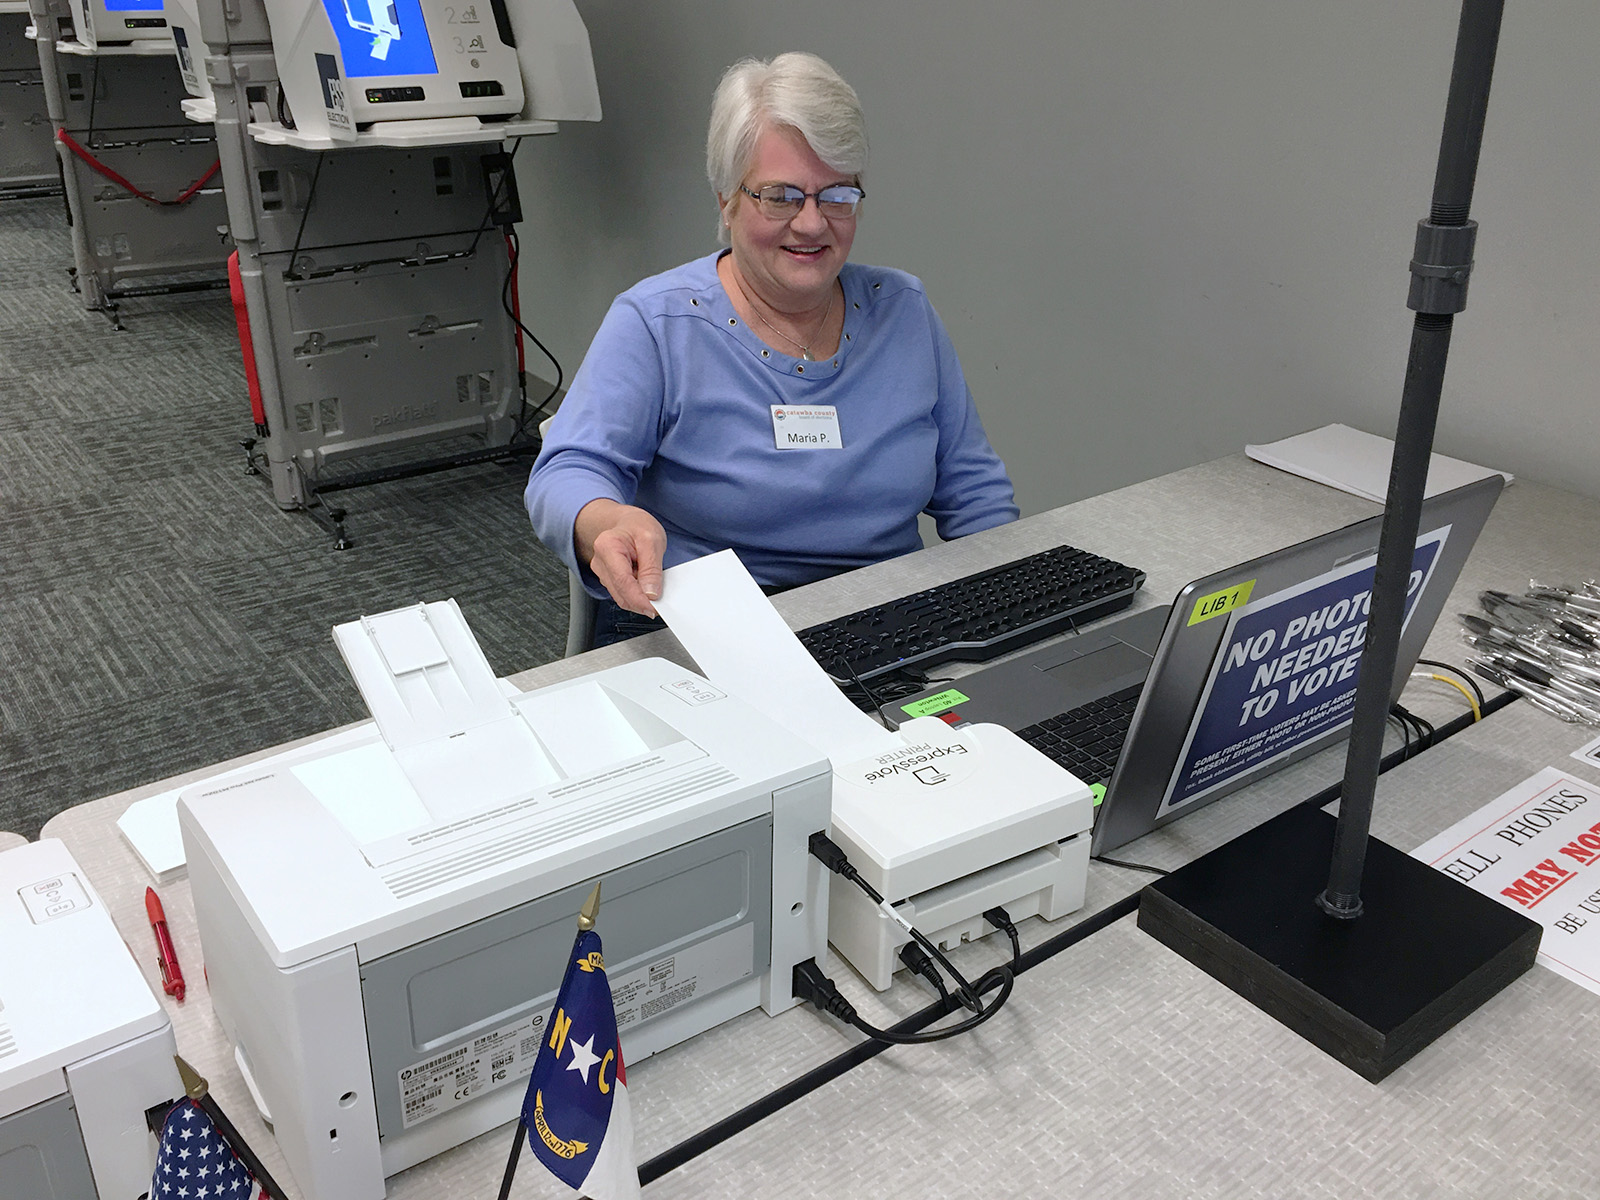 A Catawba County poll worker puts a blank ballot in the ExpressVote Printer, which prints a voter’s precinct number and ballot style barcode on the ballot.